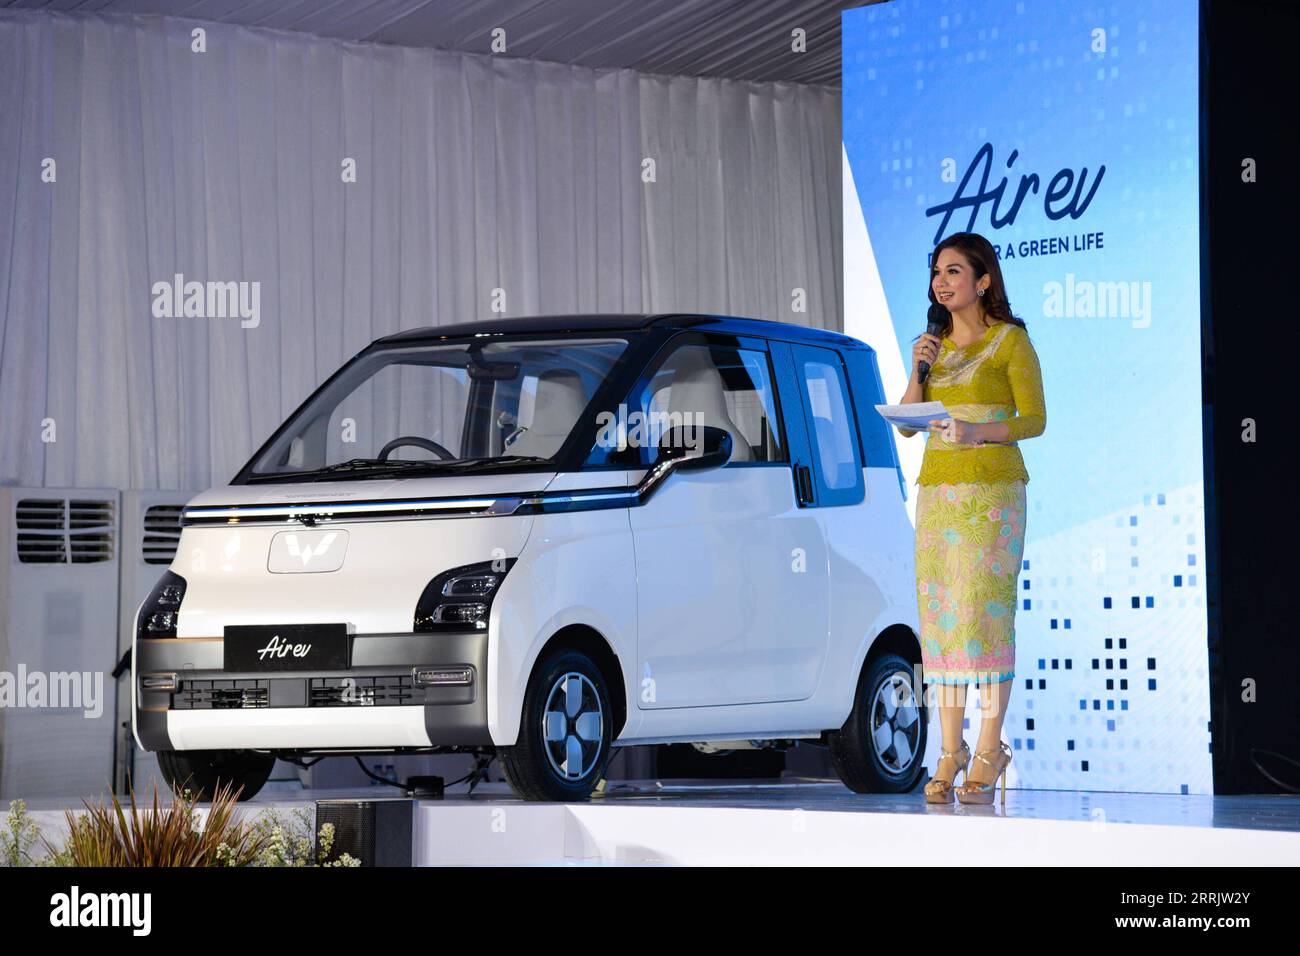 220809 -- BEKASI, Aug. 9, 2022 -- A hostess briefs people on Wuling Air EV during the roll-out ceremony at Wuling s production factory in Bekasi, West Java province, Indonesia, Aug. 8, 2022. SAIC-GM-Wuling SGMW, a major Chinese automobile manufacturer, through its local unit SGMW Motor Indonesia Wuling, on Monday launched here its production of the electric vehicle in Indonesia, named Wuling Air EV. INDONESIA-BEKASI-CHINA-WULING AIR EV-ROLL-OUT CEREMONY XuxQin PUBLICATIONxNOTxINxCHN 220809 -- BEKASI, Aug. 9, 2022 -- A hostess briefs people on Wuling Air EV during the roll-out ceremony at Wulin Stock Photo